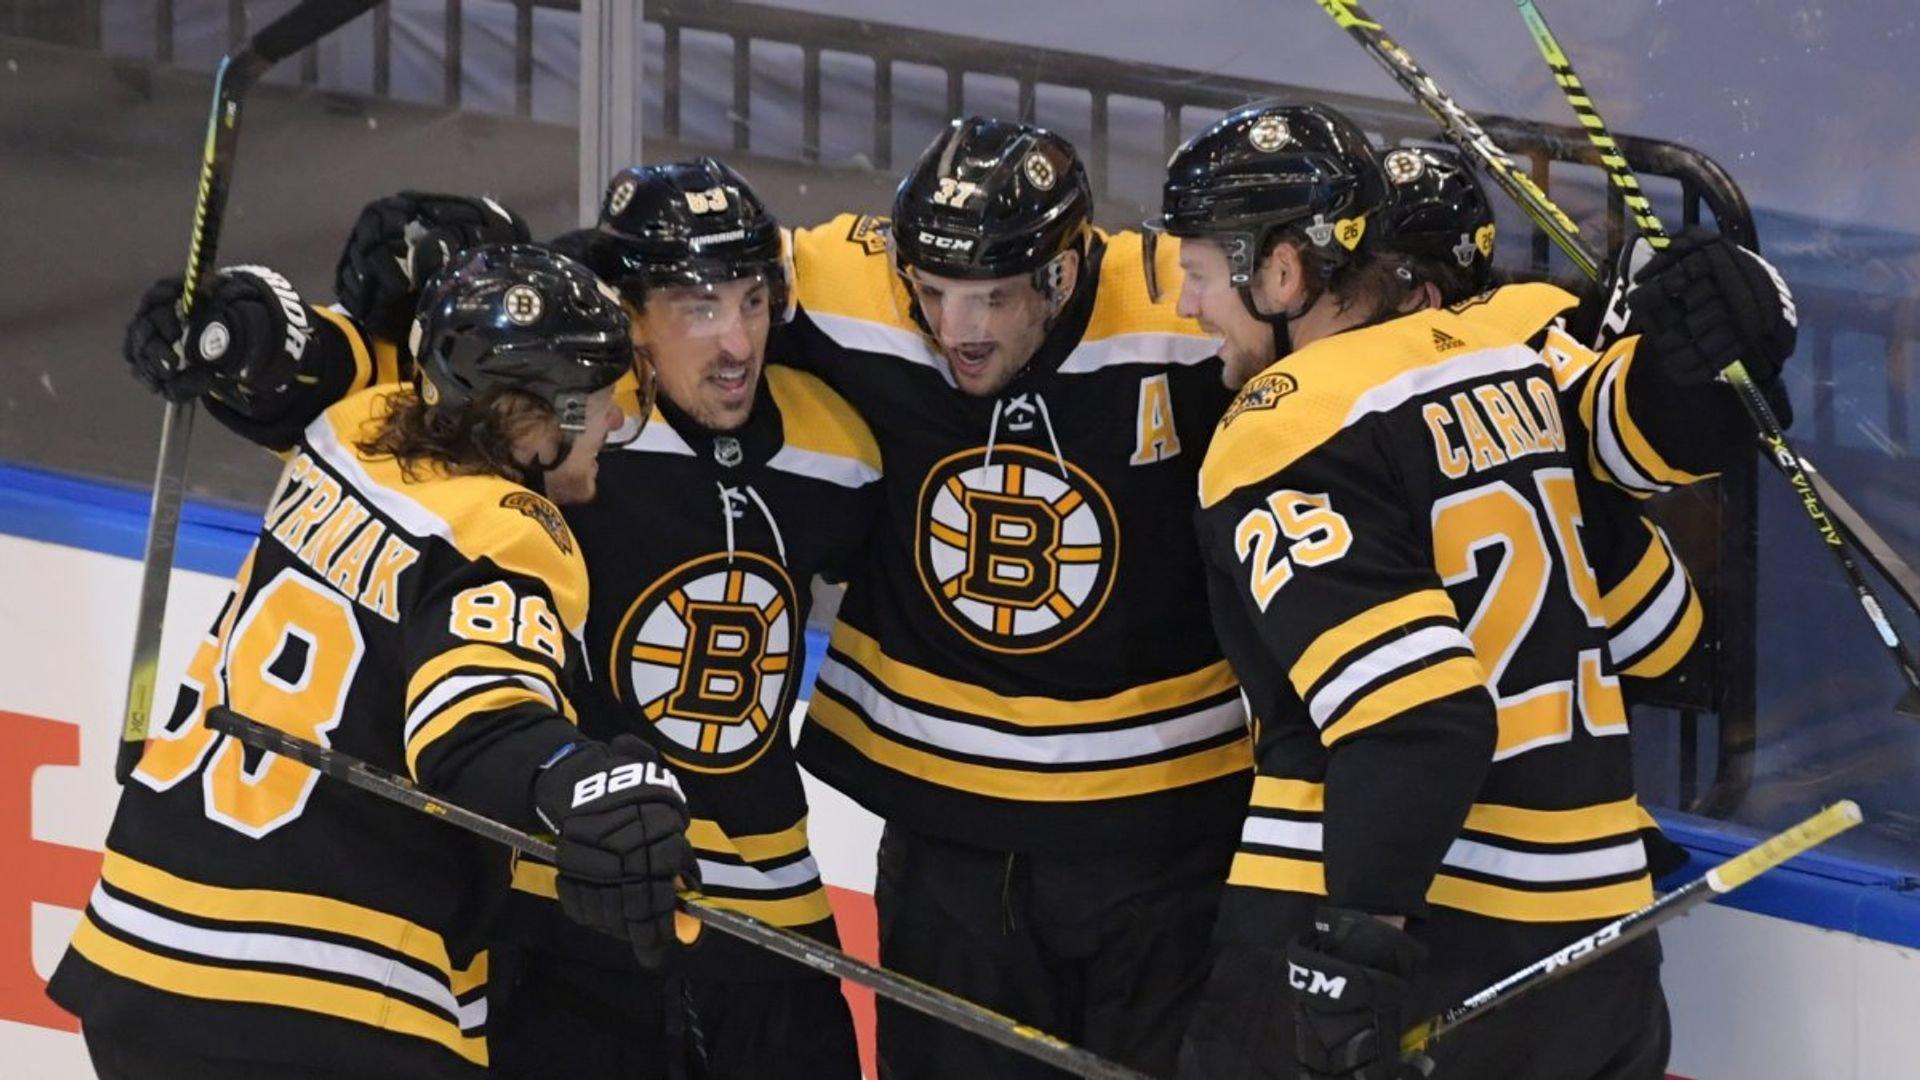 The Boston Bruins have been electric, and so has Morgan Geekie. An NHL best bet.